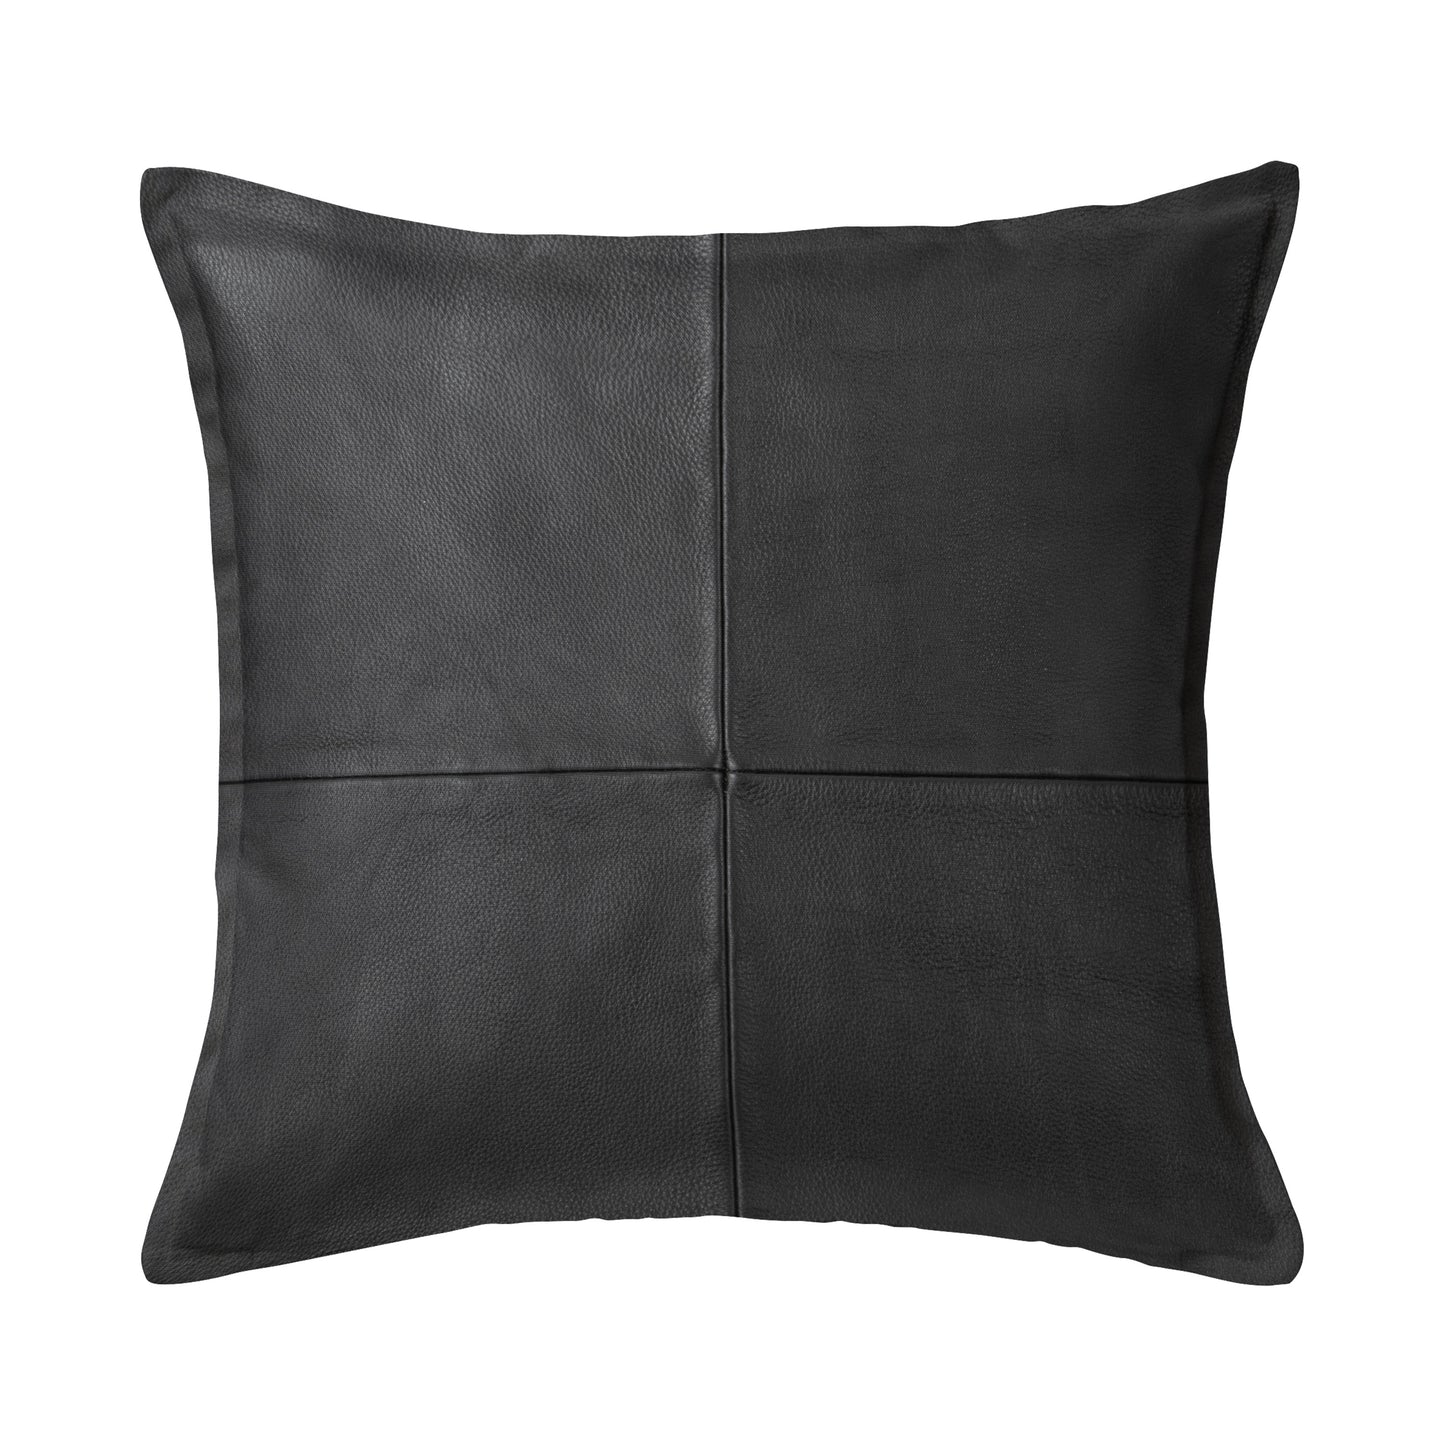 SWHF Solid Leather Cushion Cover 18" x 18" (Black)